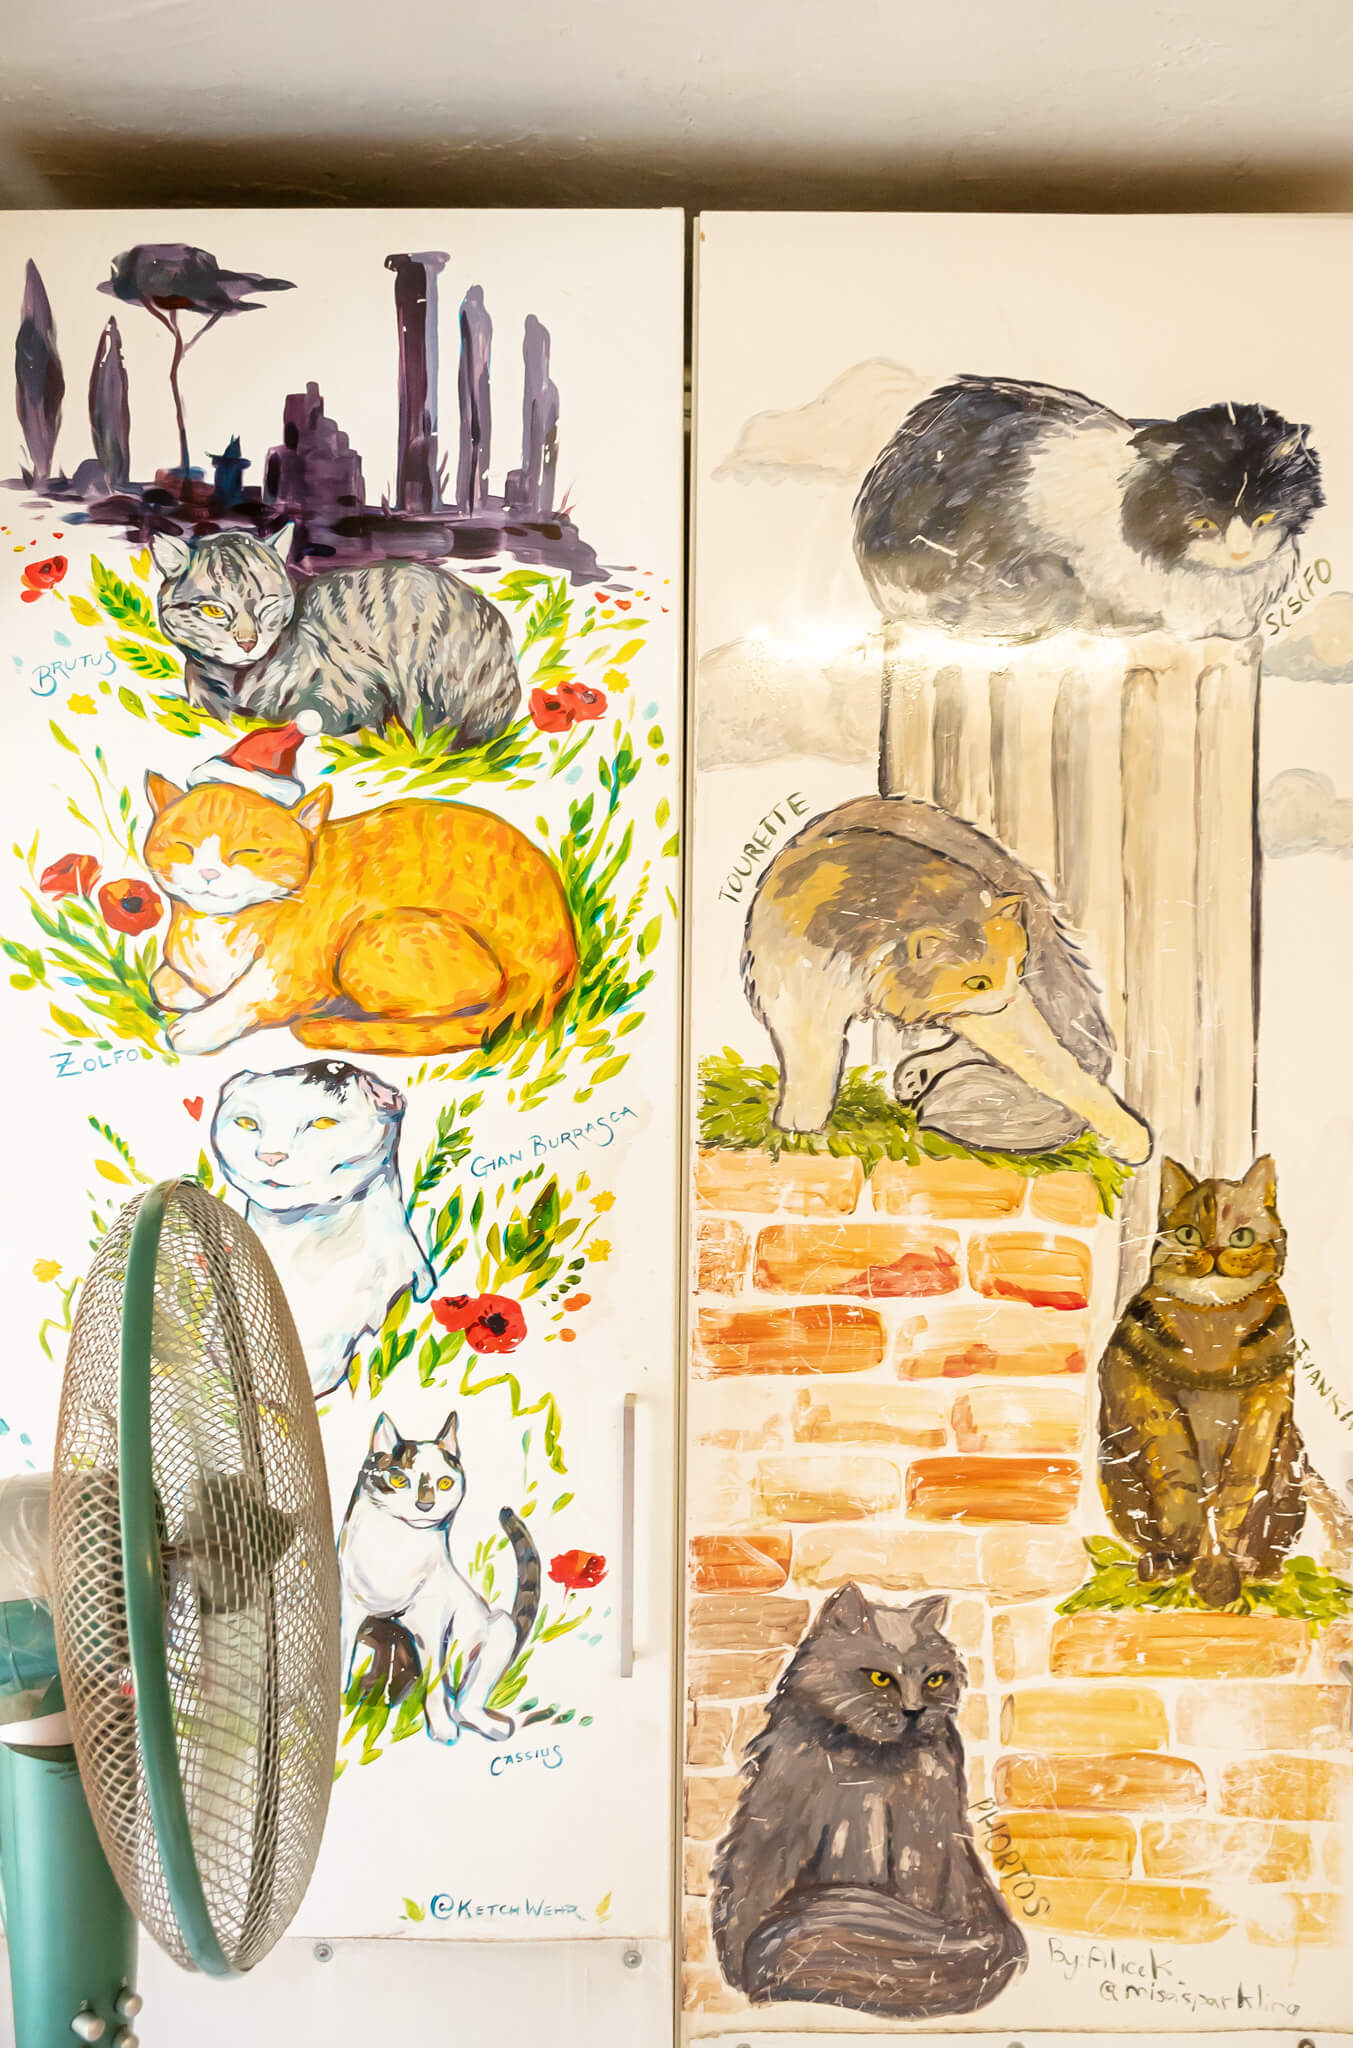 A cat mural on the wall at the Rome Cat Sanctuary